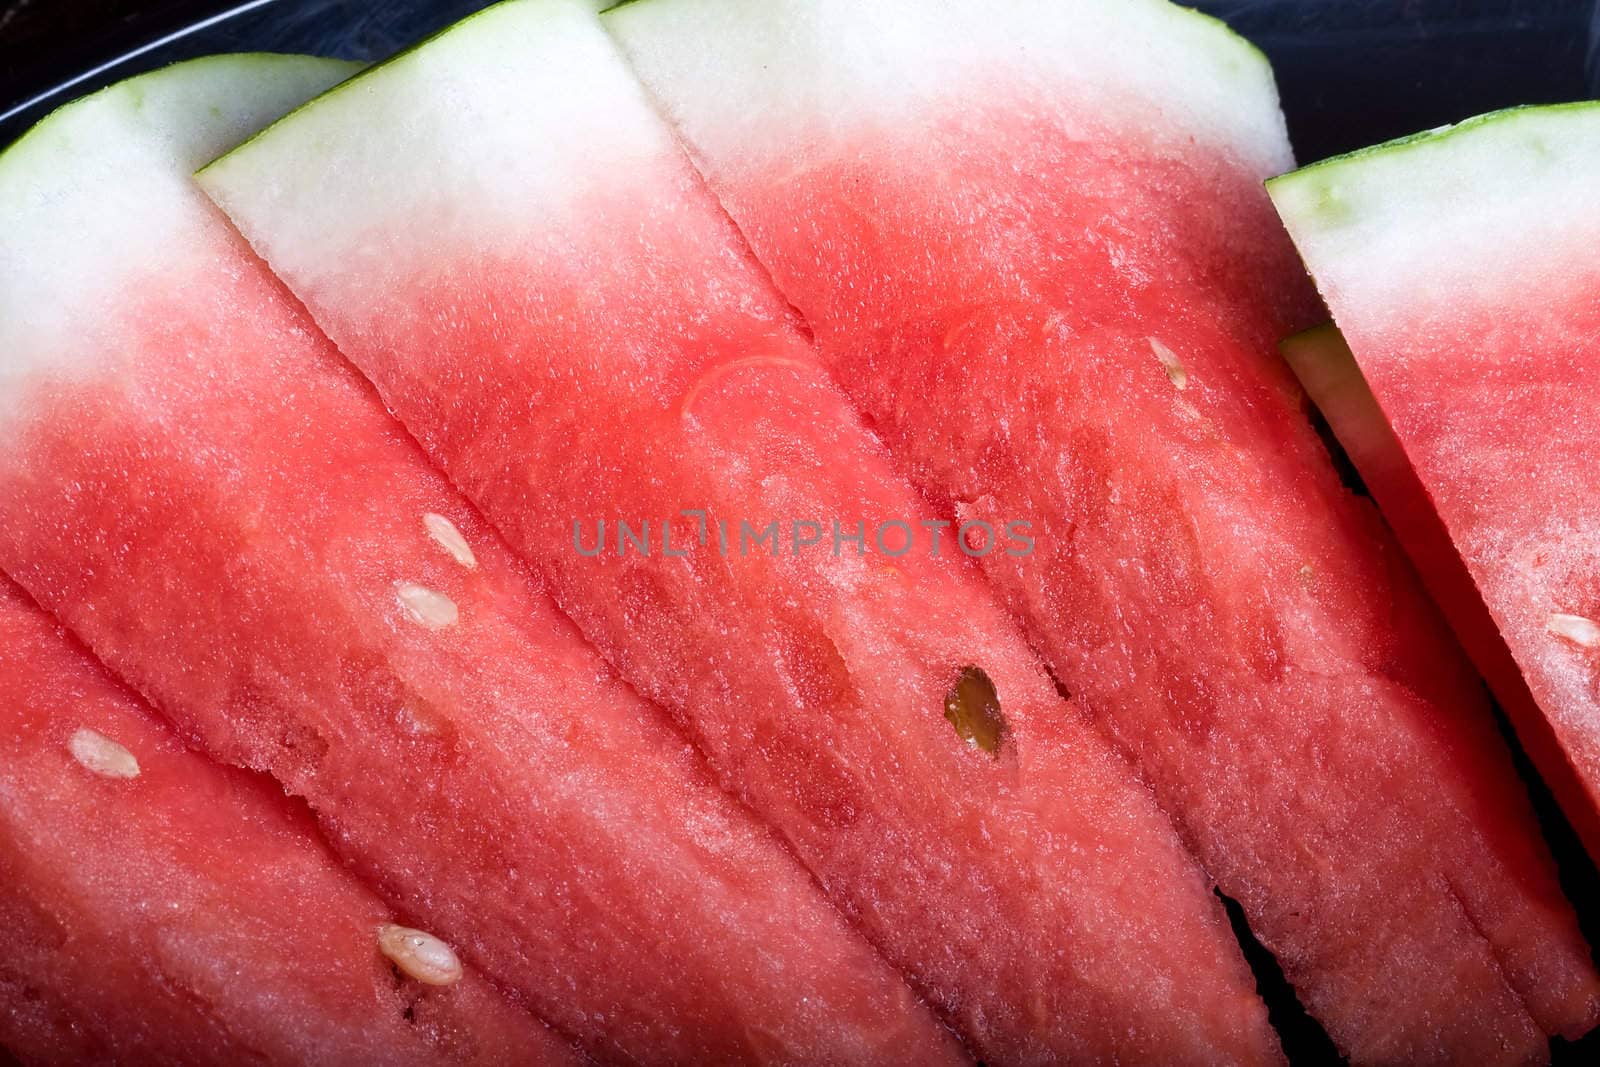 a sweet summer treat juicy watermelon close up and bright colors